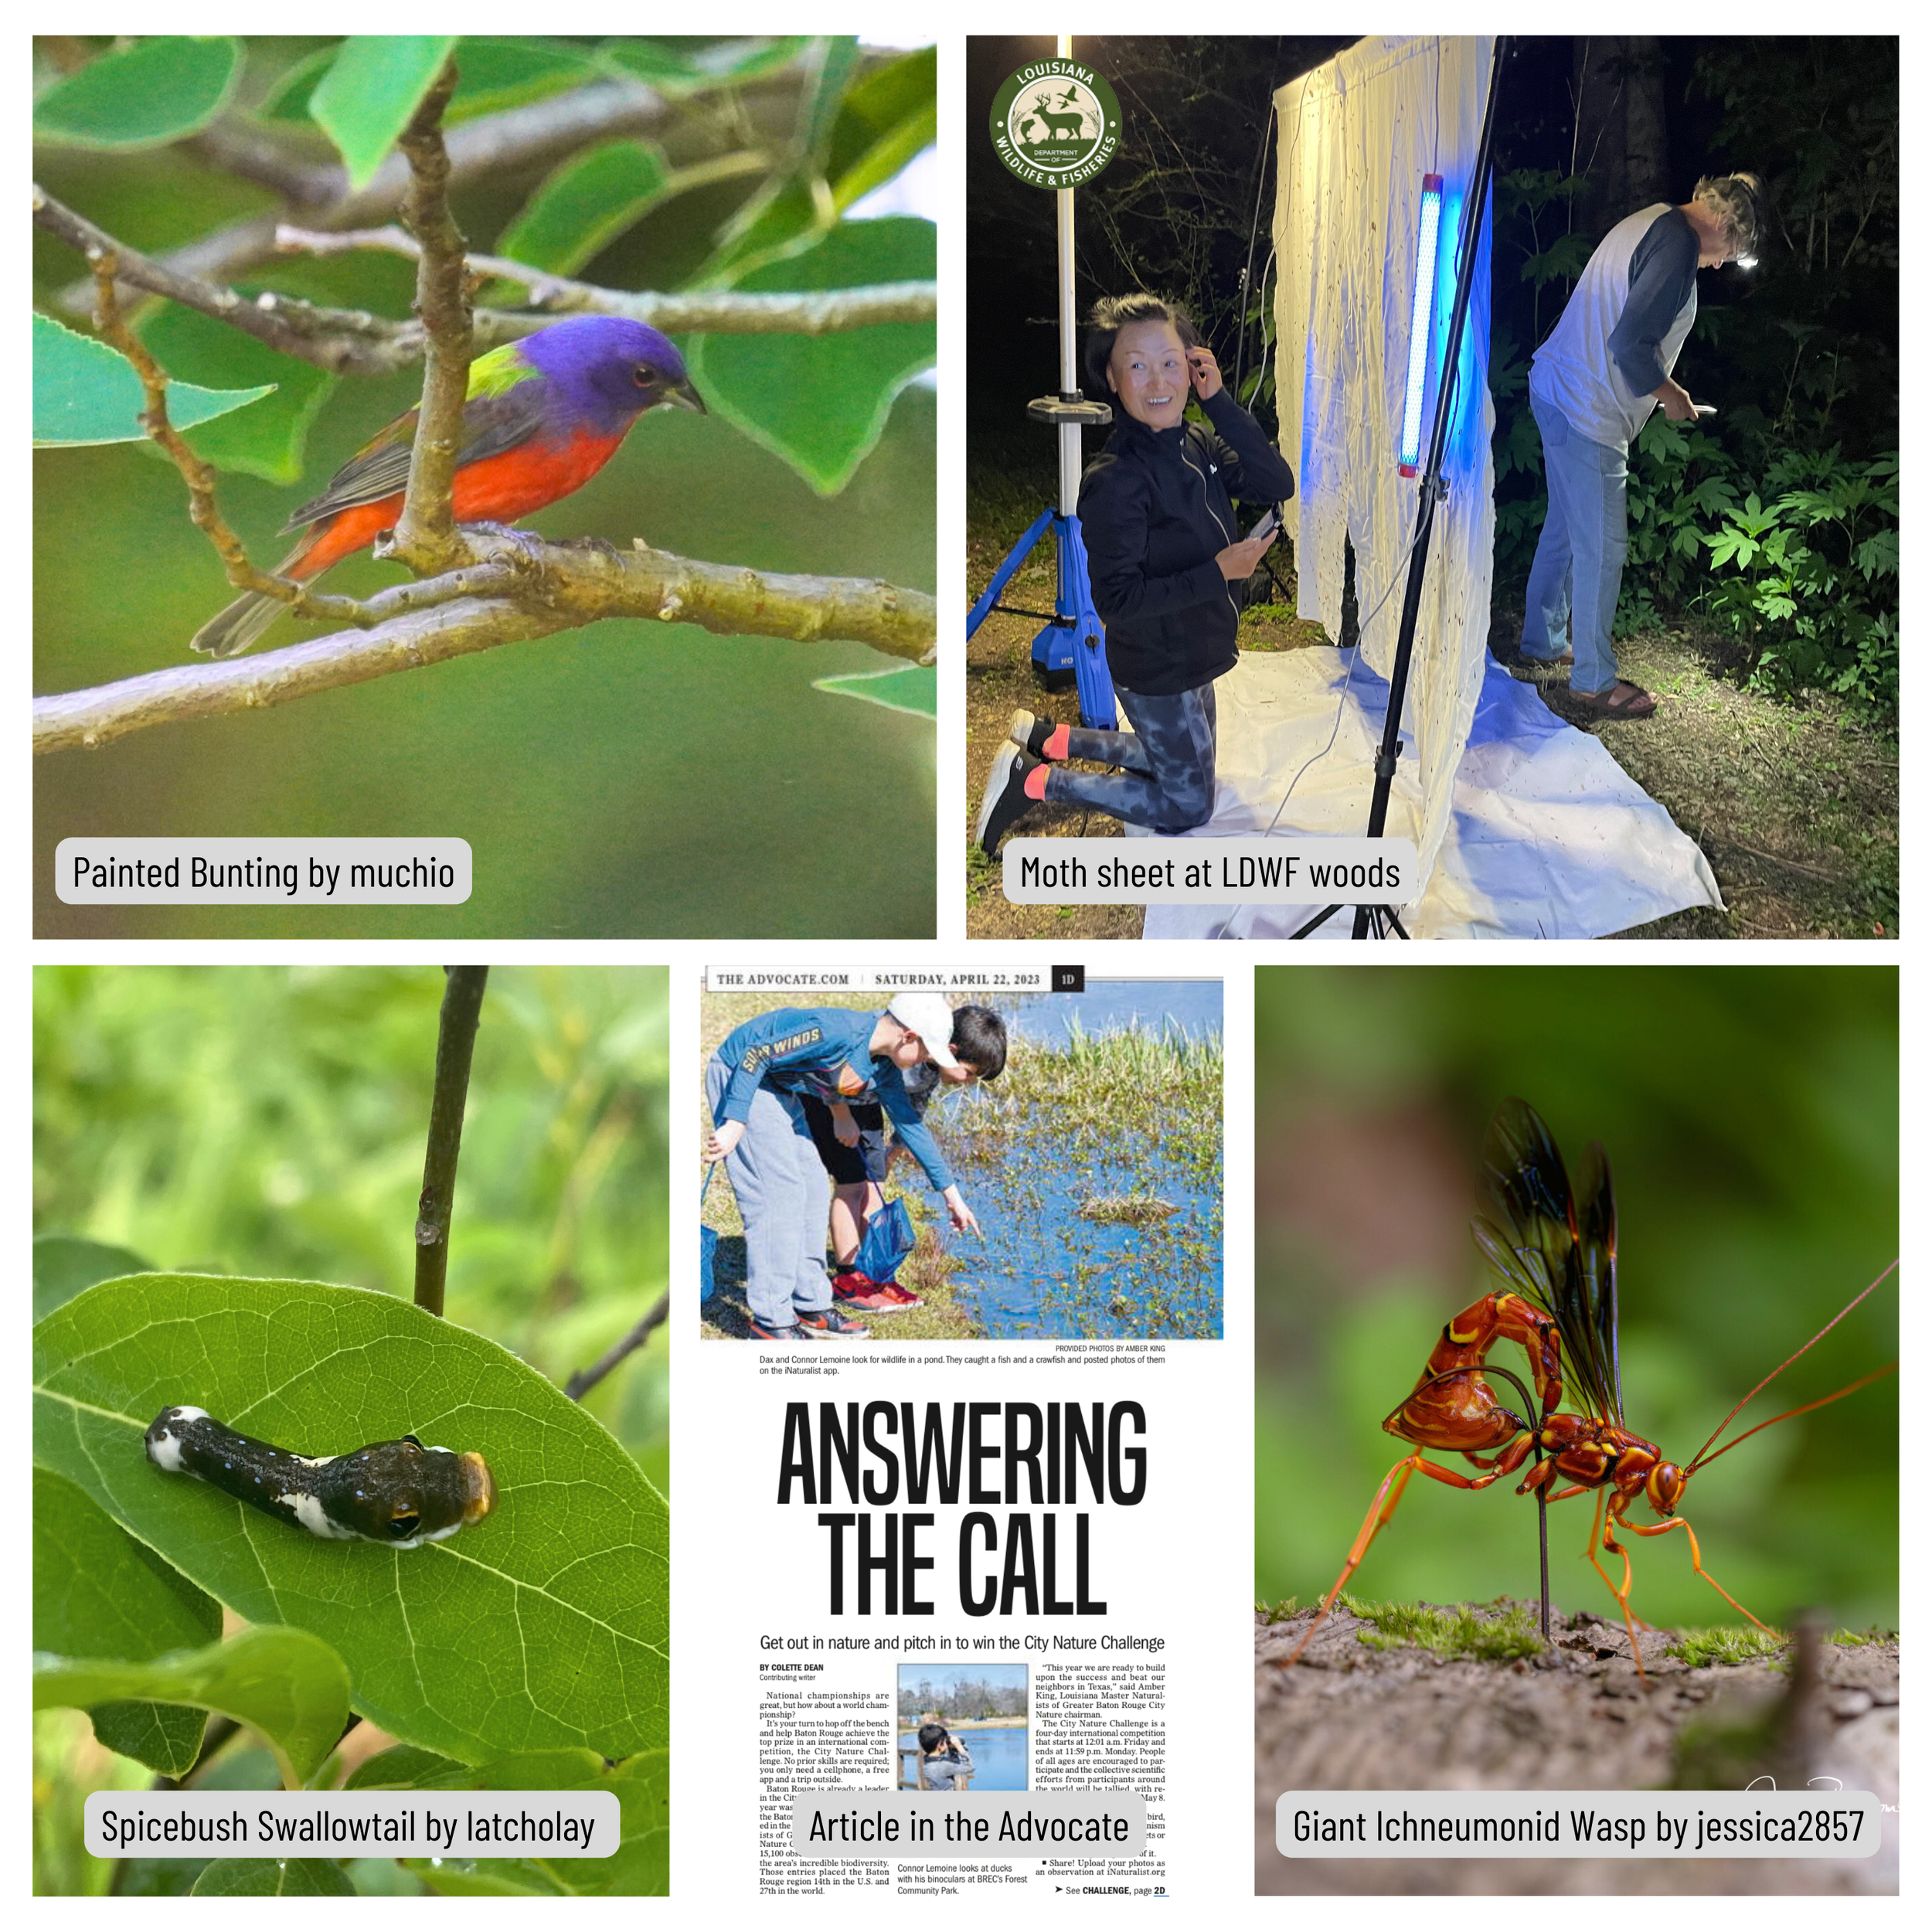  Painted Bunting; Moth sheet in the LDWF woods; Spicebush Swallowtail caterpillar; Article in the Advocate newspaper; Giant Ichneumonid Wasp. 